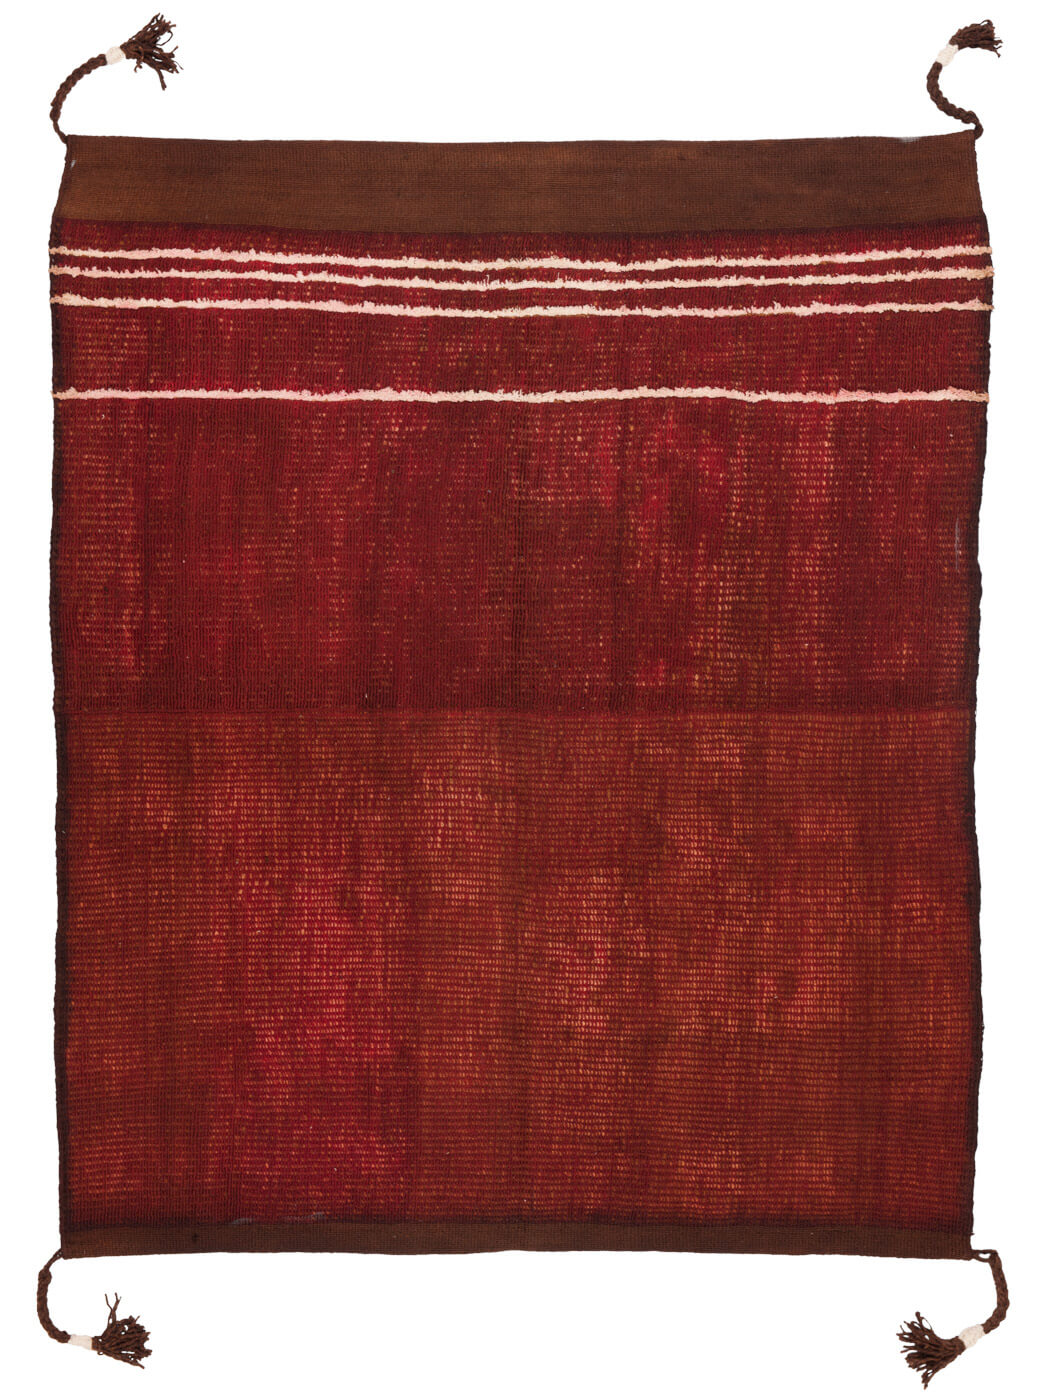 Tribal Red Hand-Woven Luxury Rug ☞ Size: 200 x 300 cm